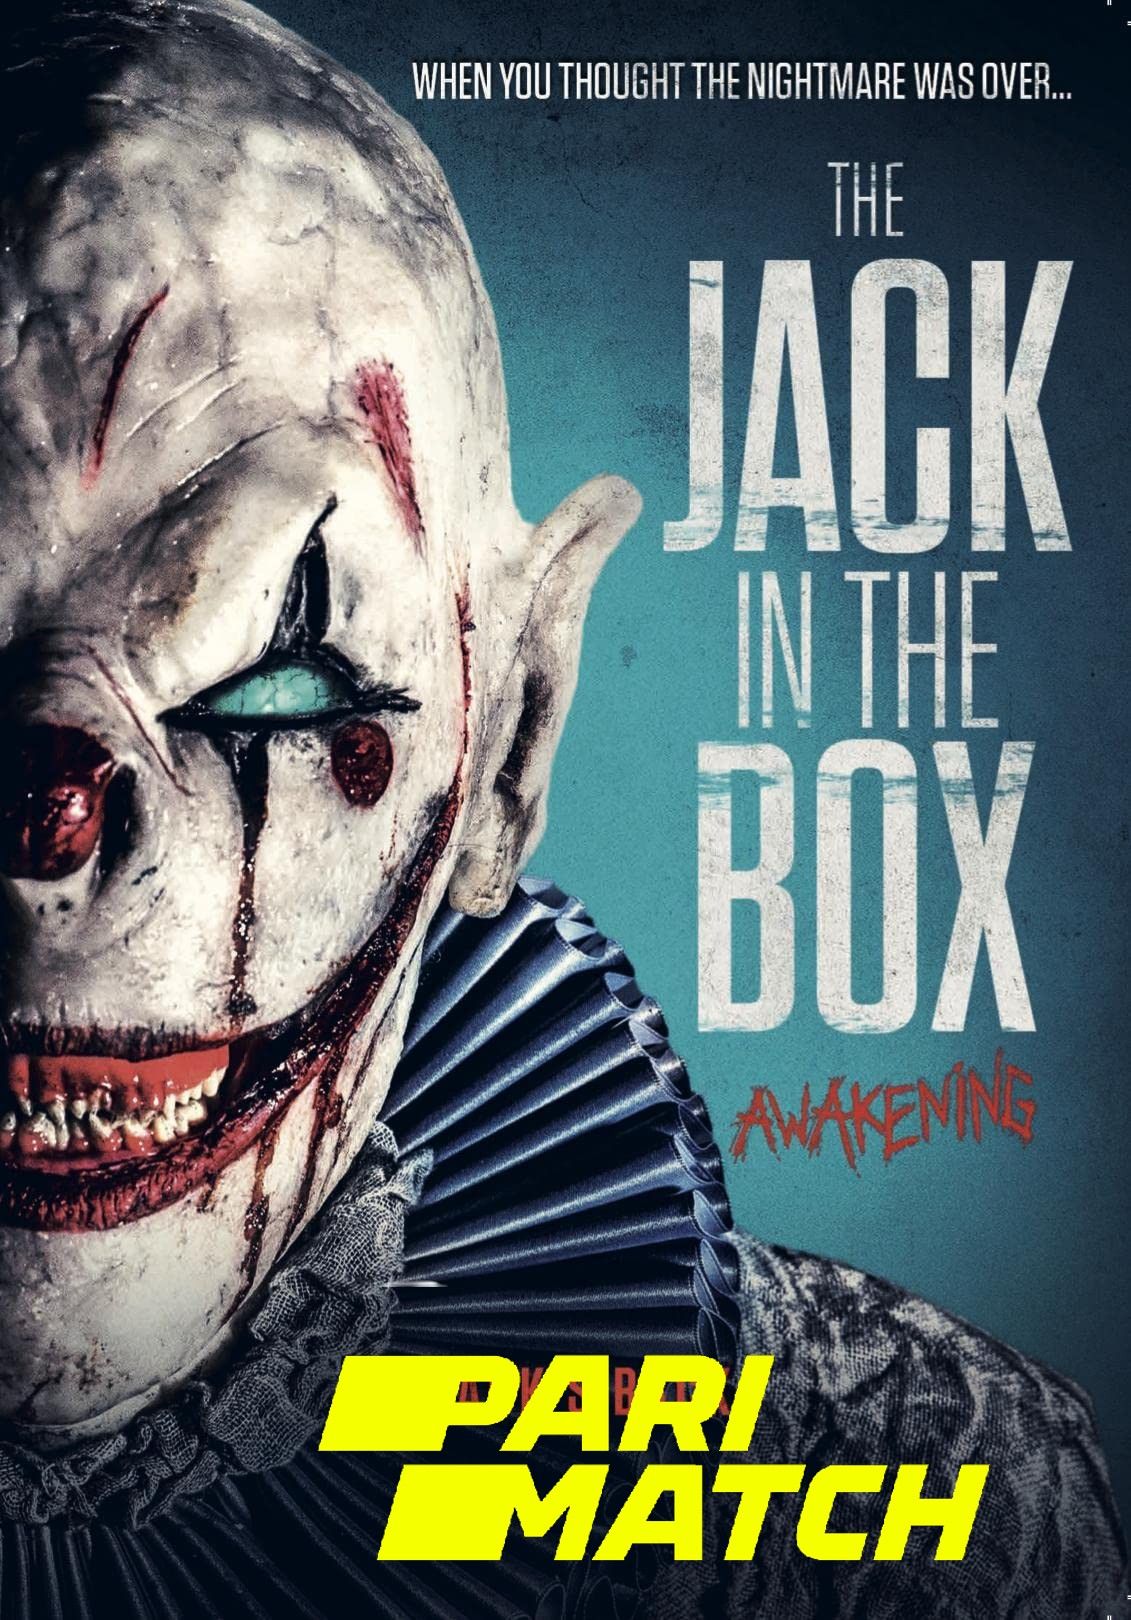 The Jack in the Box: Awakening (2022) Hindi (Voice Over) Dubbed BluRay download full movie